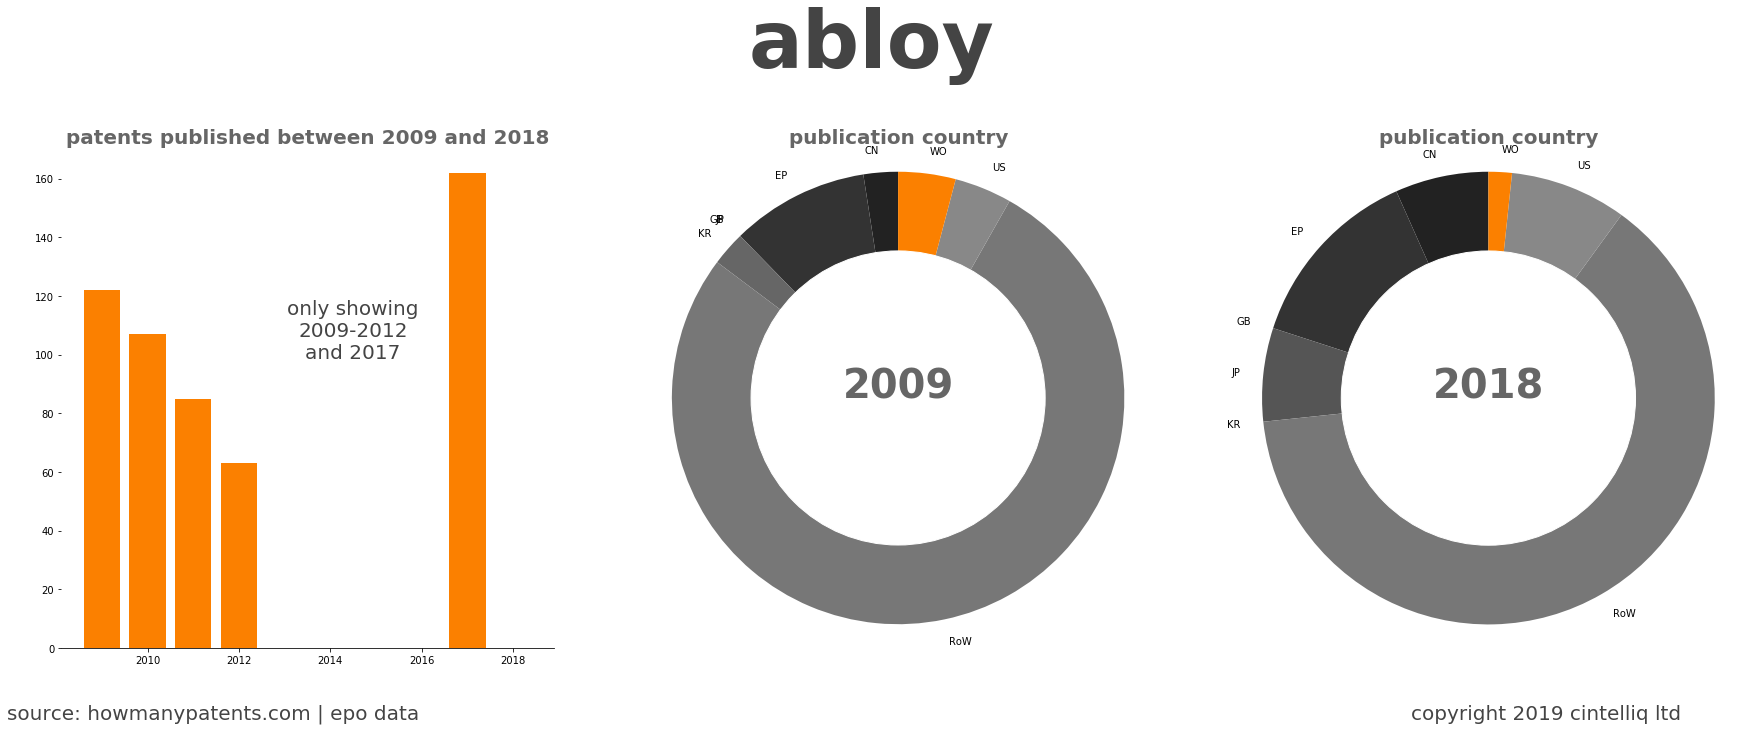 summary of patents for Abloy